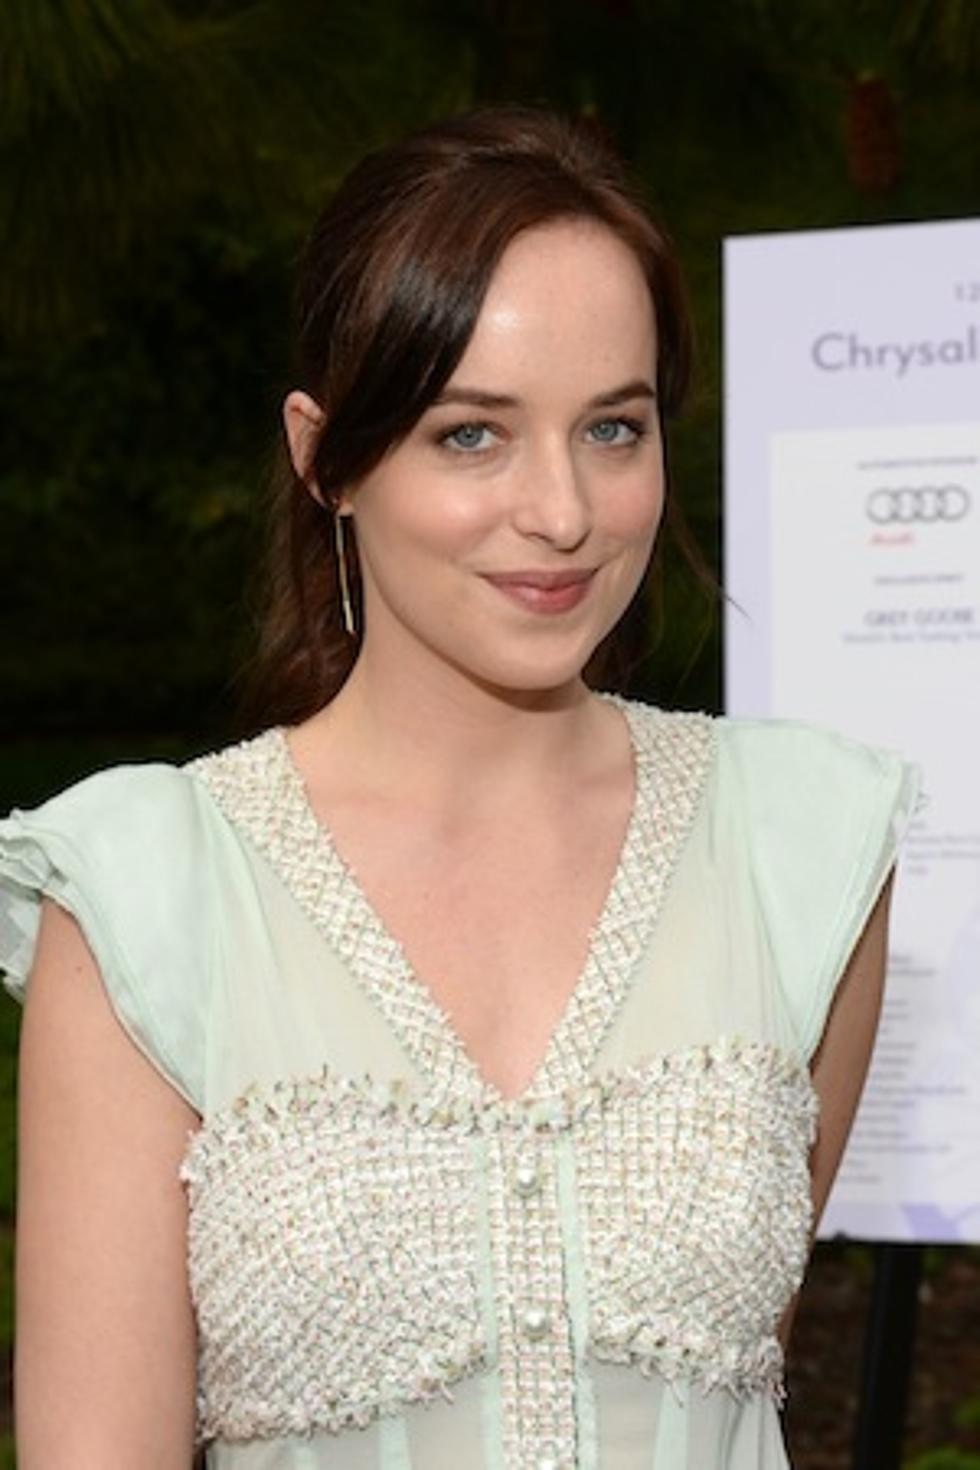 Dakota Johnson is a Celeb Crush Who is Probably In Hiding This Week